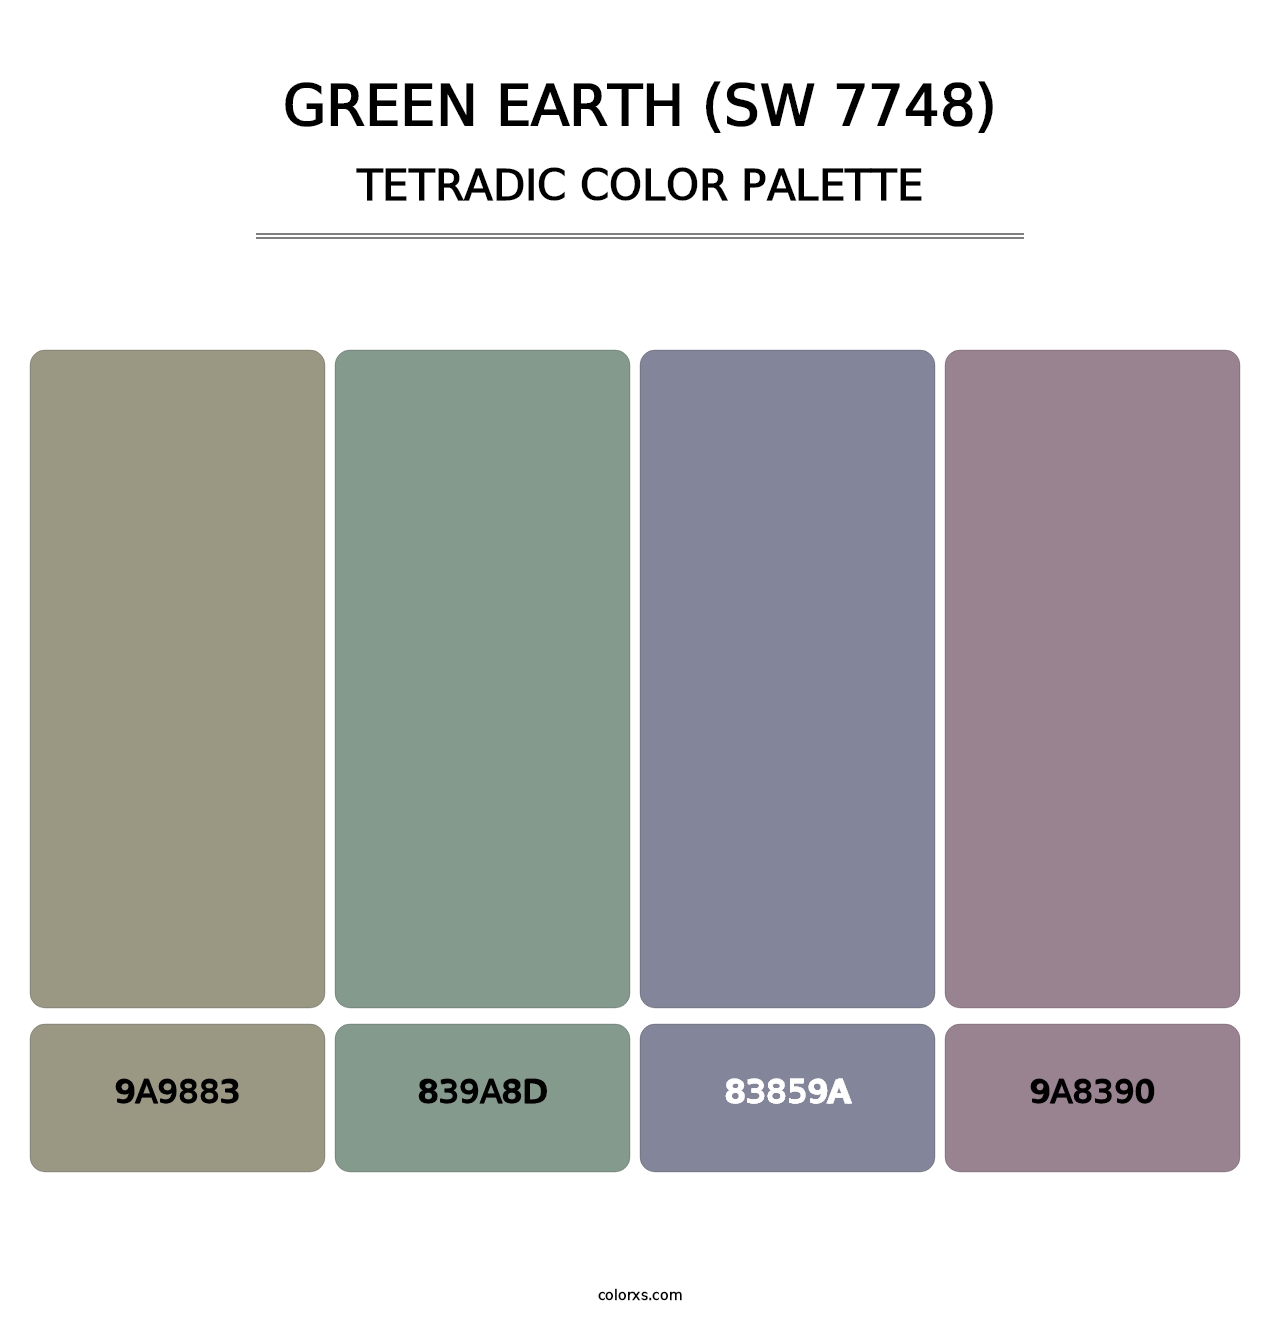 Green Earth (SW 7748) - Tetradic Color Palette